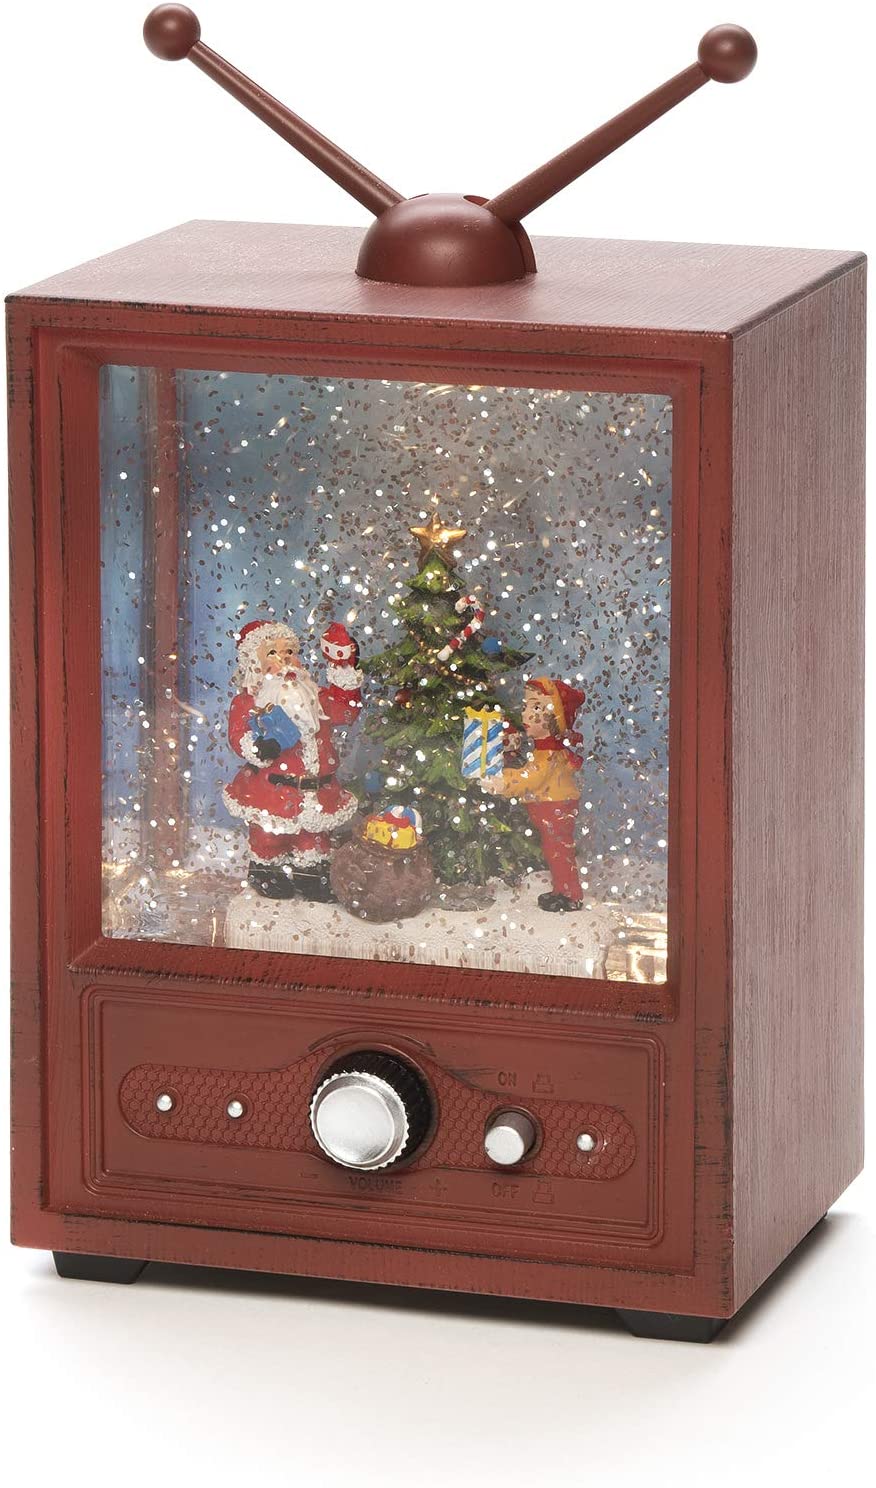 Brown excl. /Optional Eight Song Music Function Filled/Water Spinner Konstsmide LED Snow Globe TV Santa and Child Scene/Christmas Lantern Warm White Diode/Transformer or Battery 3xAA 1.5V 